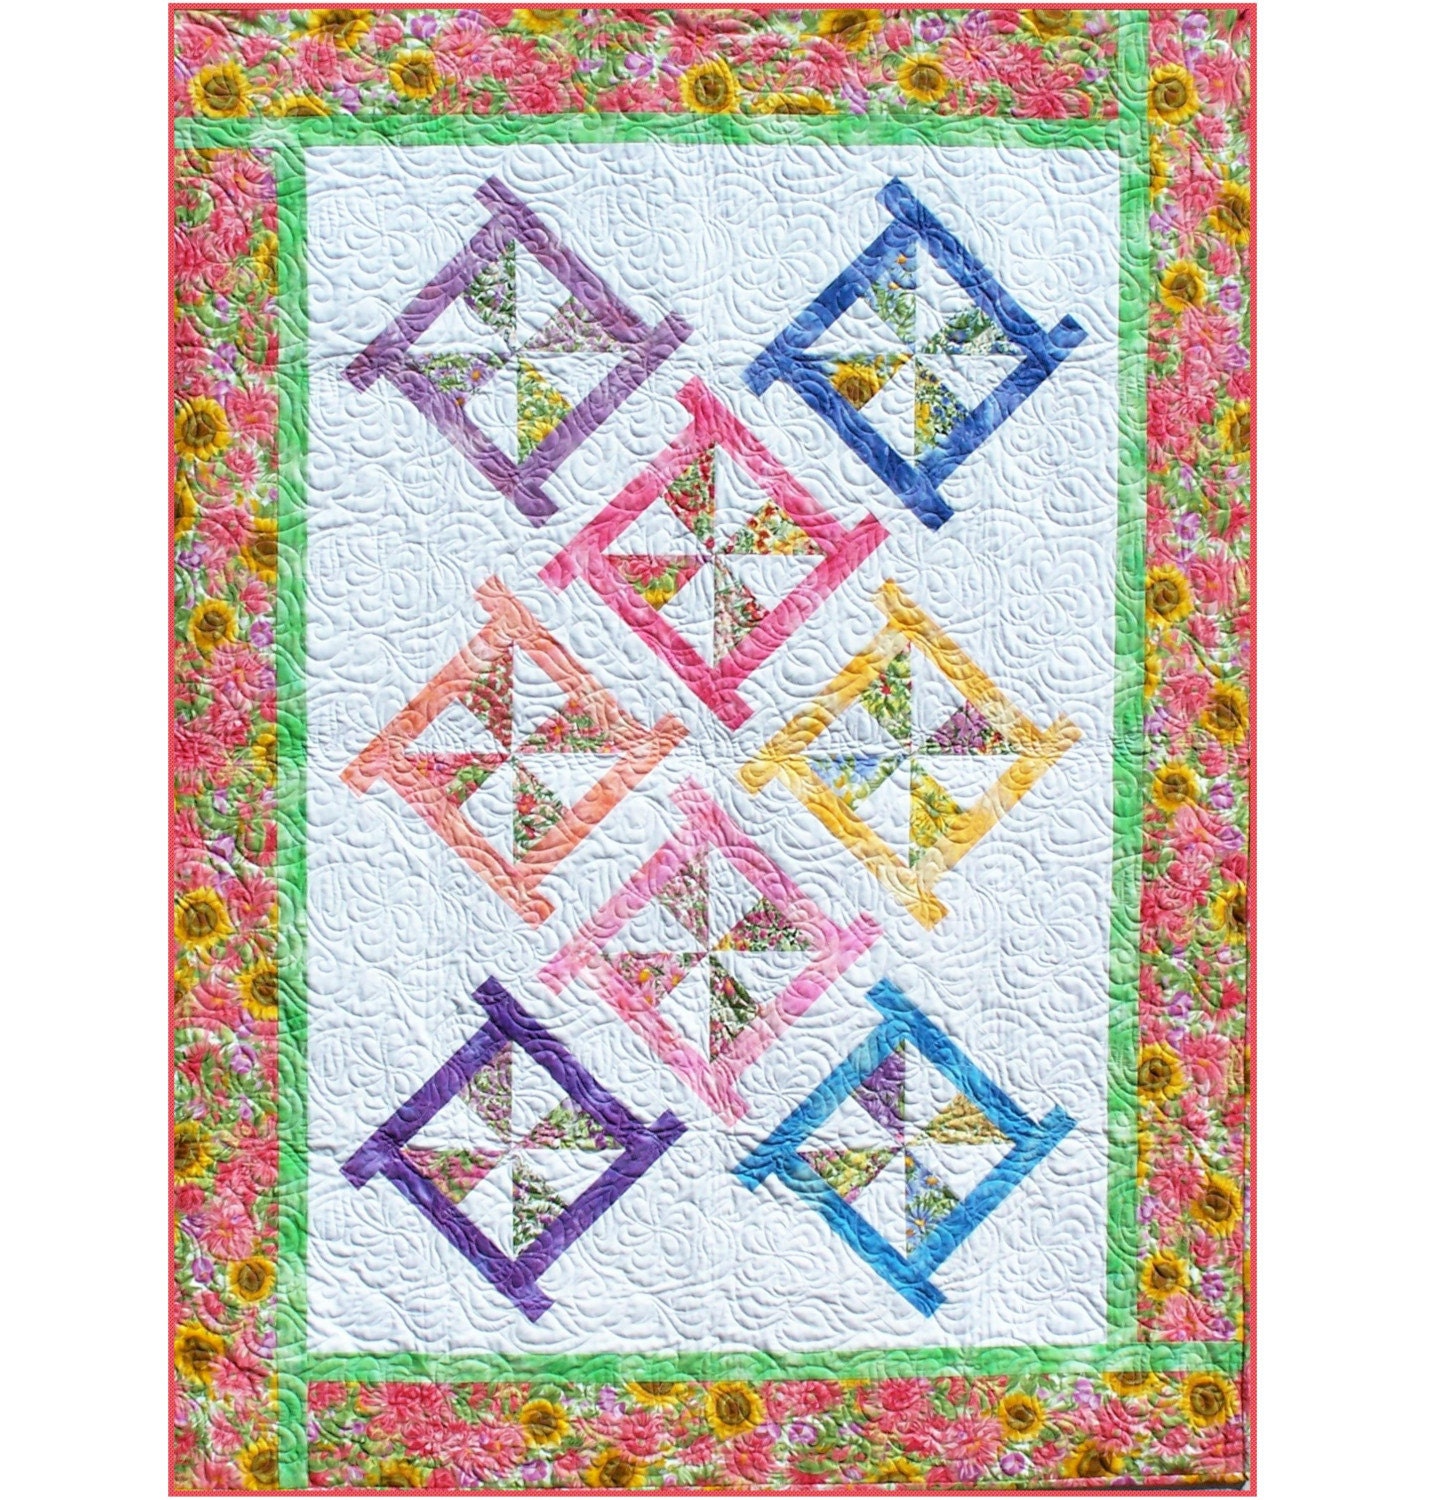 free-quilting-templates-to-print-9-free-printable-quilt-stencils